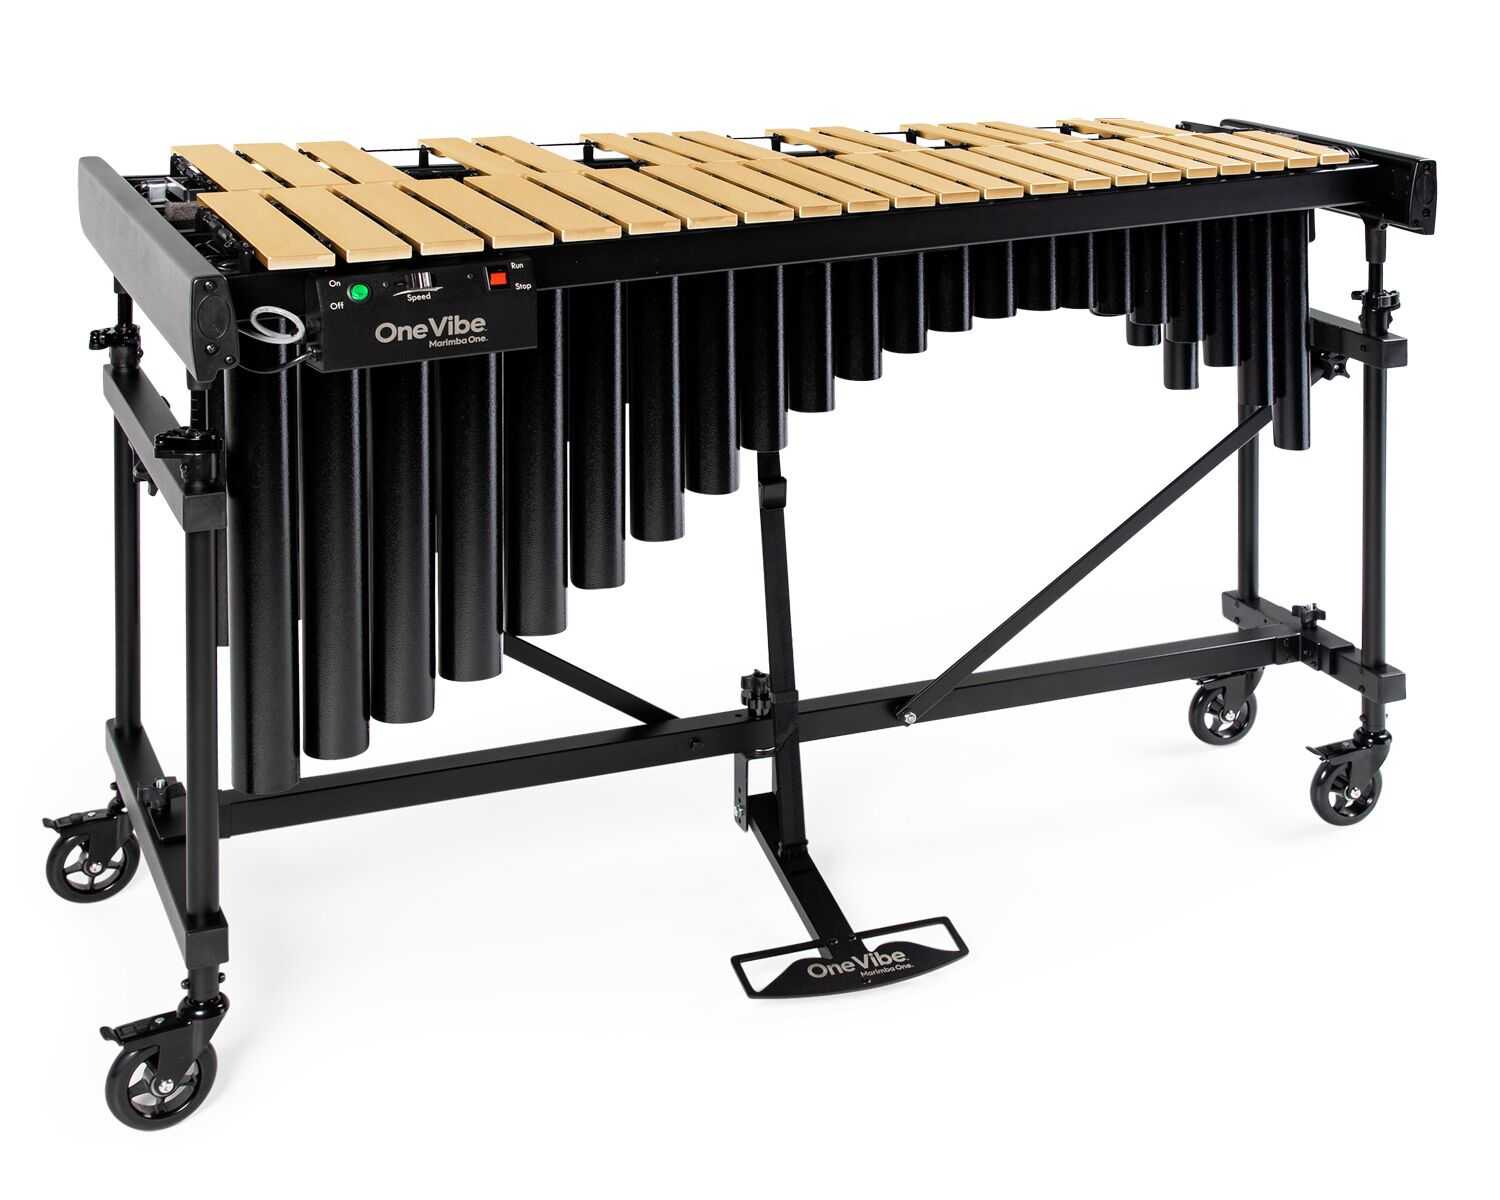 One Vibe: 3 oct Gold Bar Vibraphone (with motor)